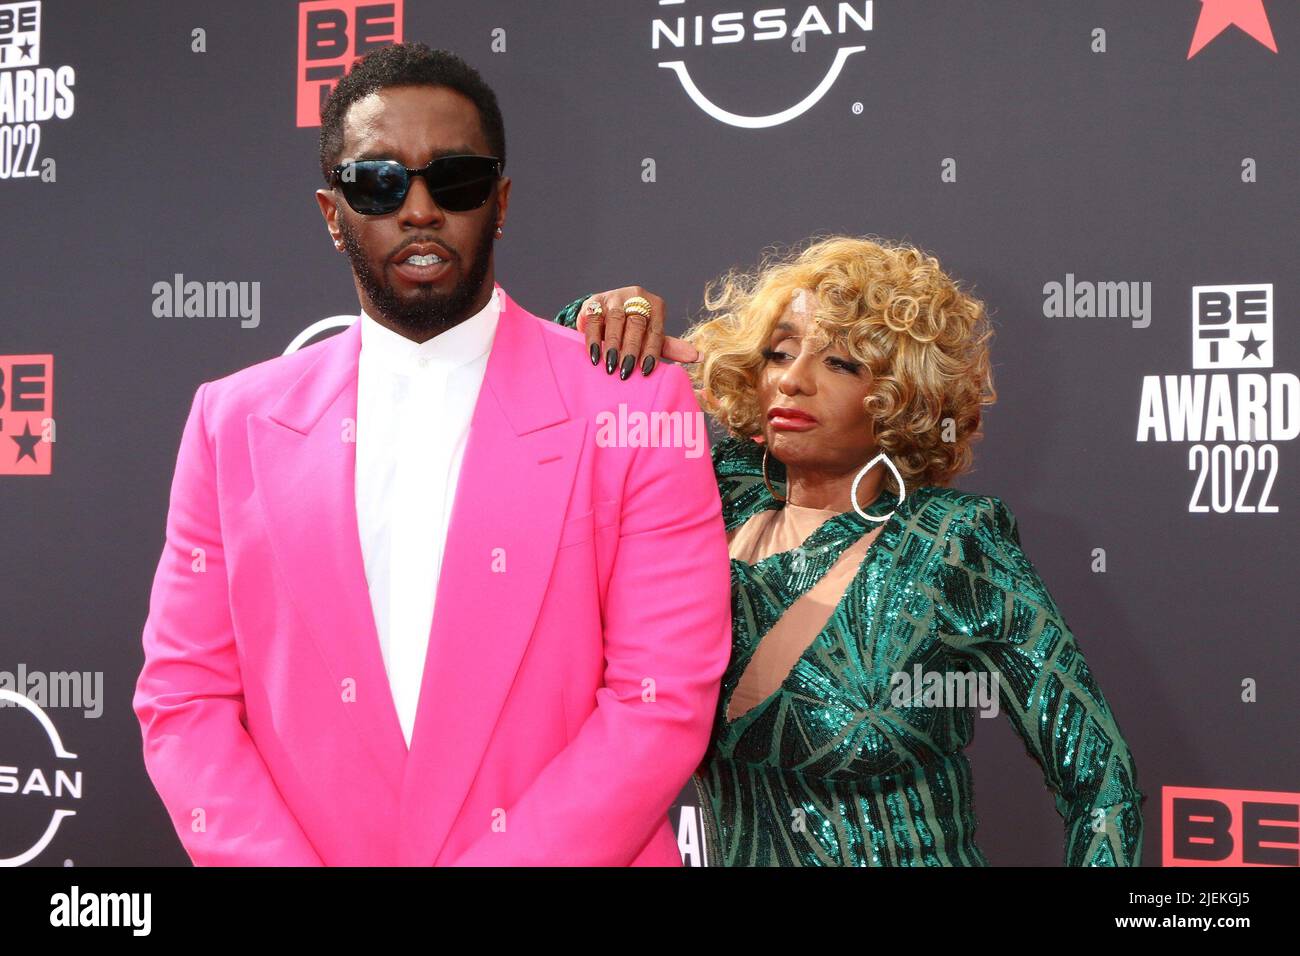 Los Angeles, CA. 26th June, 2022. Sean Combs, mother Janice Combs at arrivals for BET Awards - Part 1, Microsoft Theater, Los Angeles, CA June 26, 2022. Credit: Priscilla Grant/Everett Collection/Alamy Live News Stock Photo